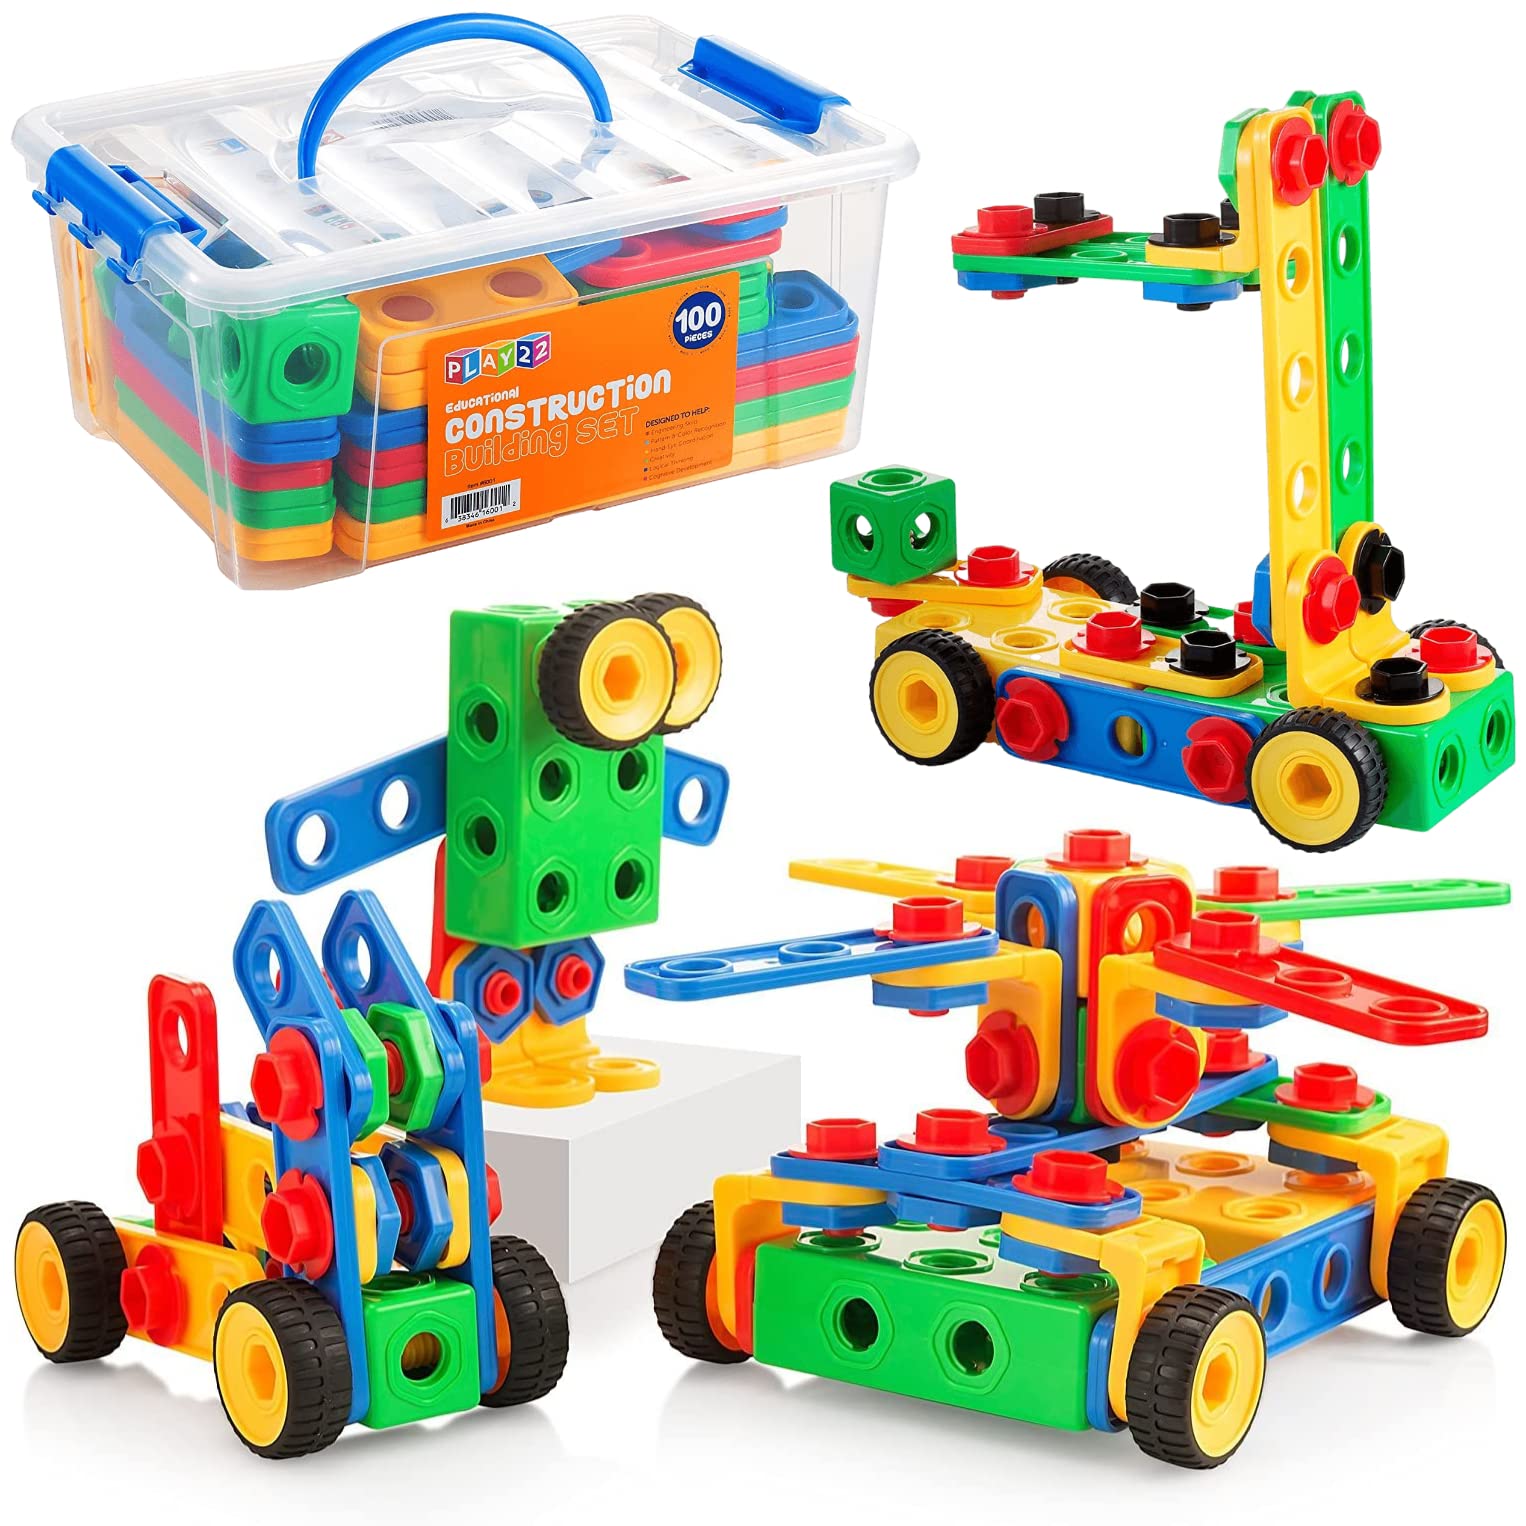 Play22 100Pc Building Blocks for Toddlers Stem Toys - Building Construction Toys for Boys and Girls Ages 3 4 5 6 7 8 9 10 - Educational Toys Set with Nice Storage Box - Original